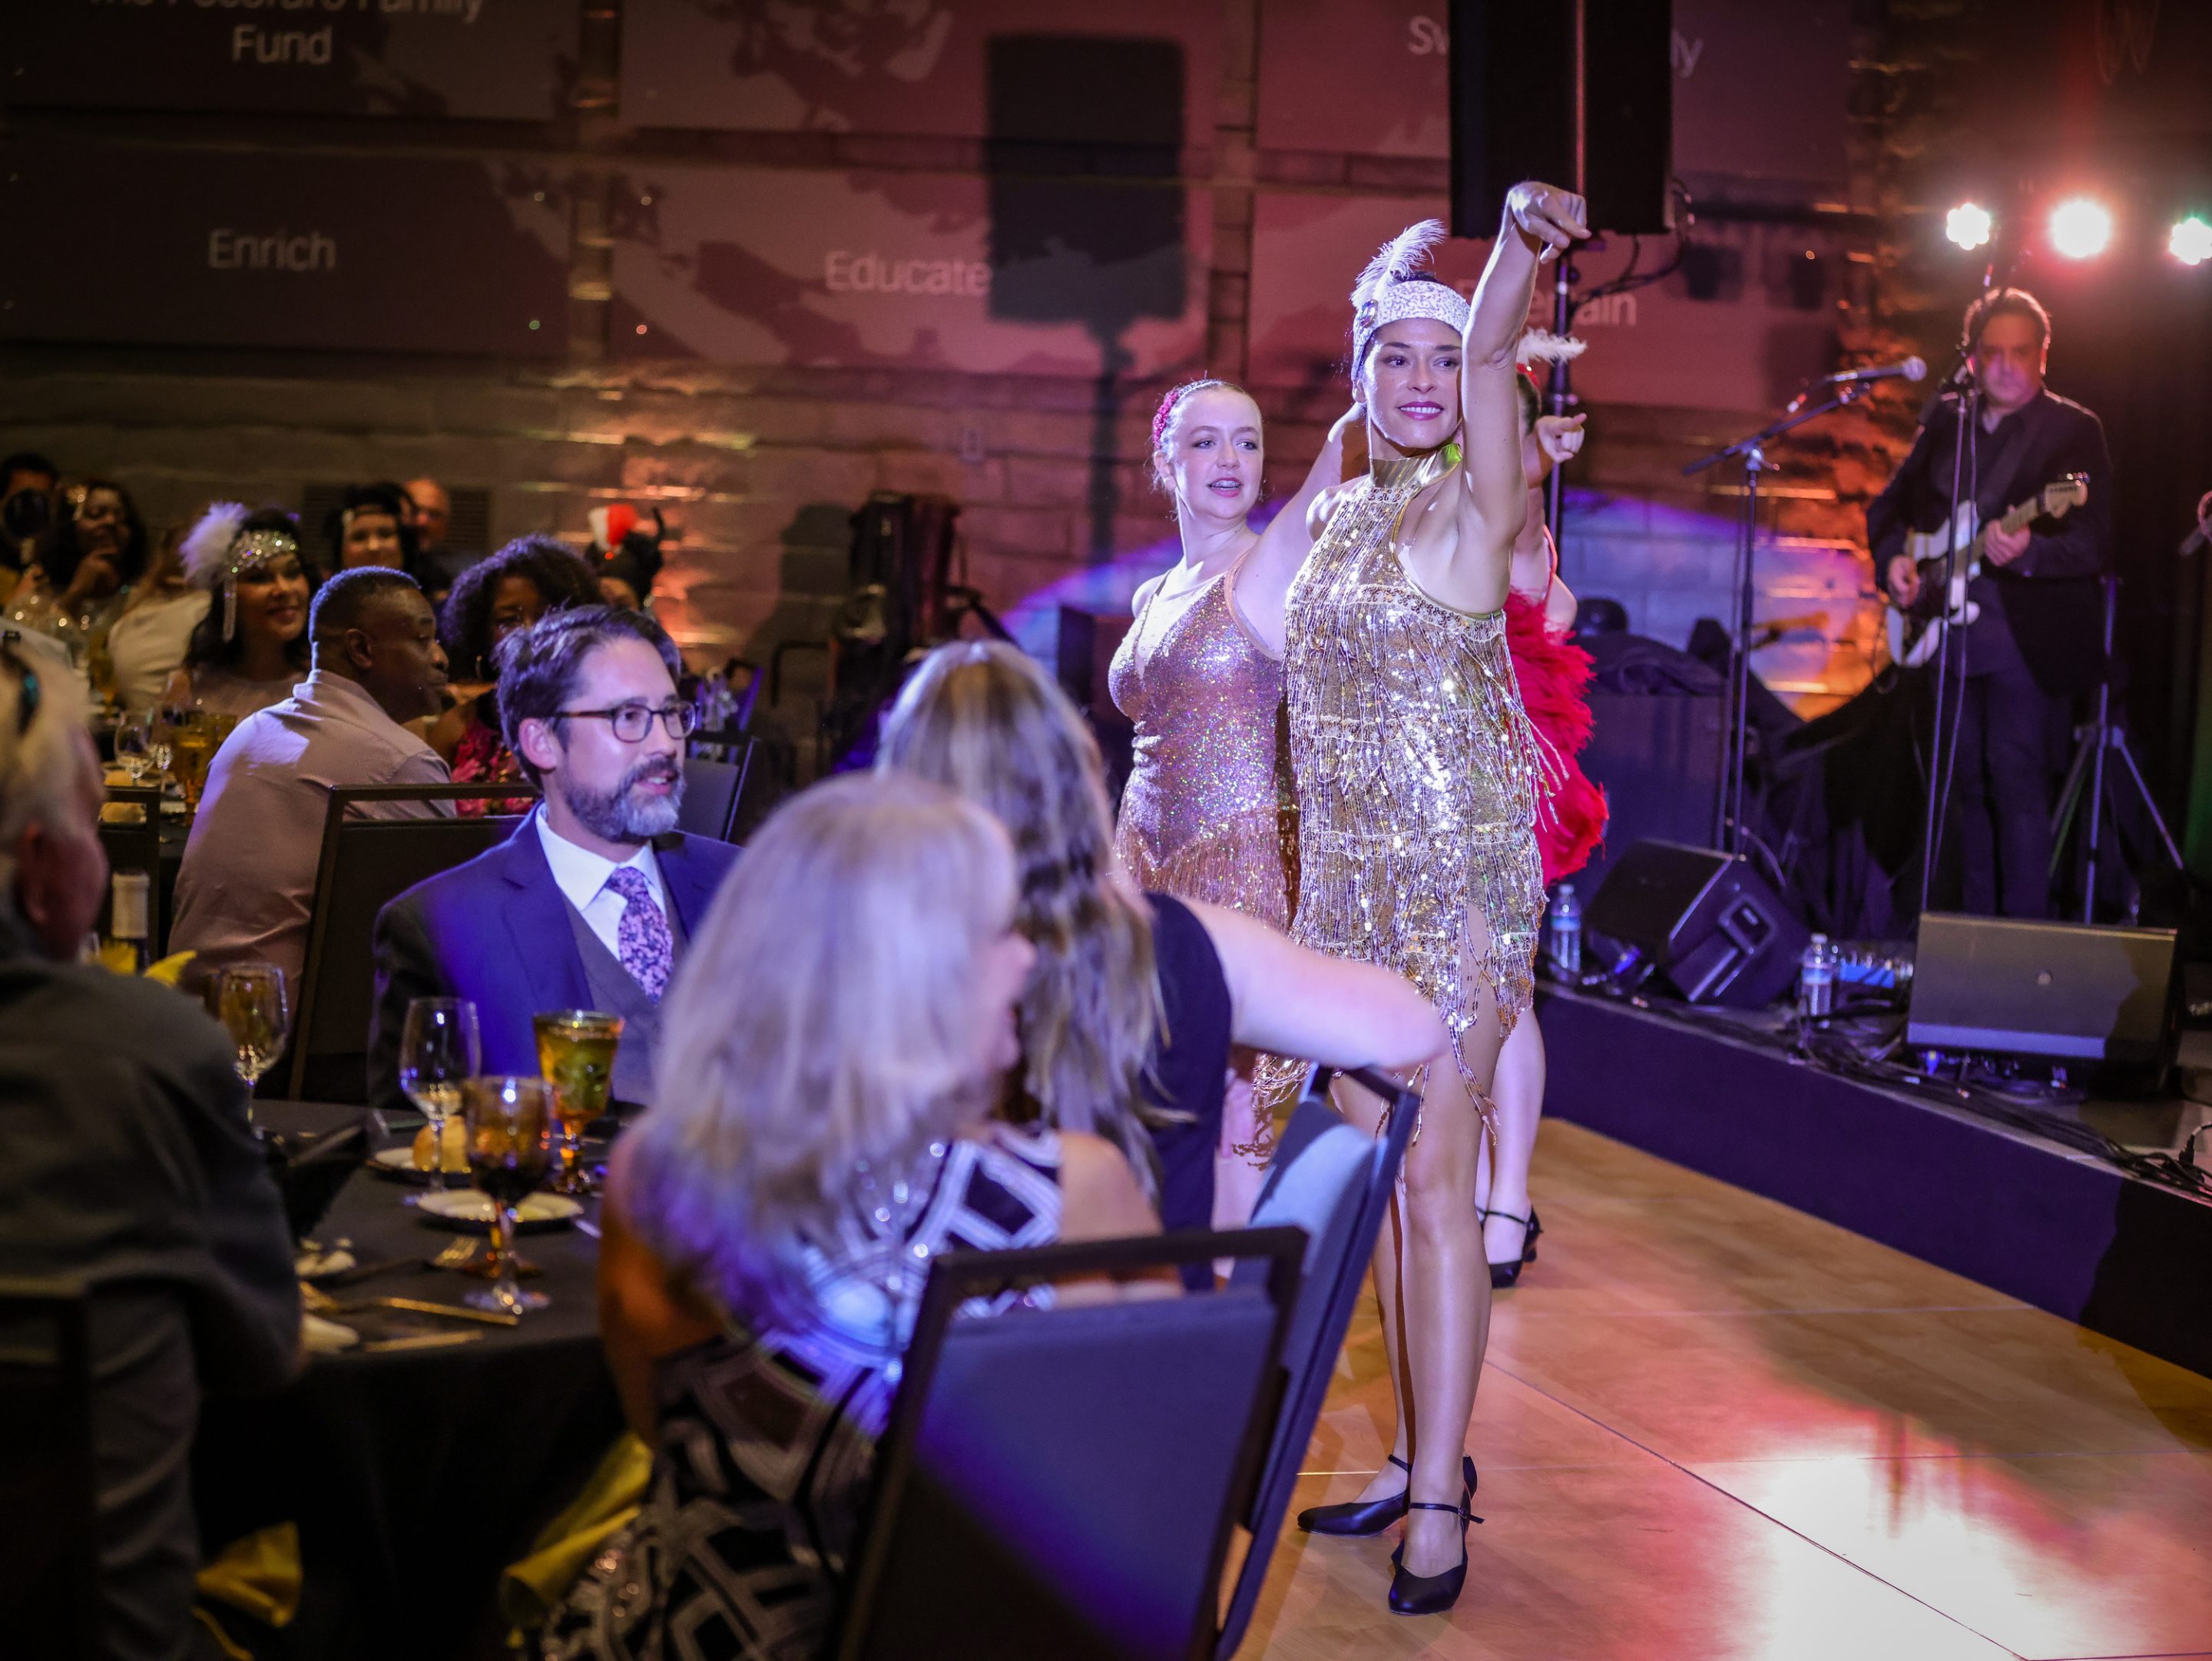 A woman in a gold dress is dancing at an event hosted by The LIME Foundation.